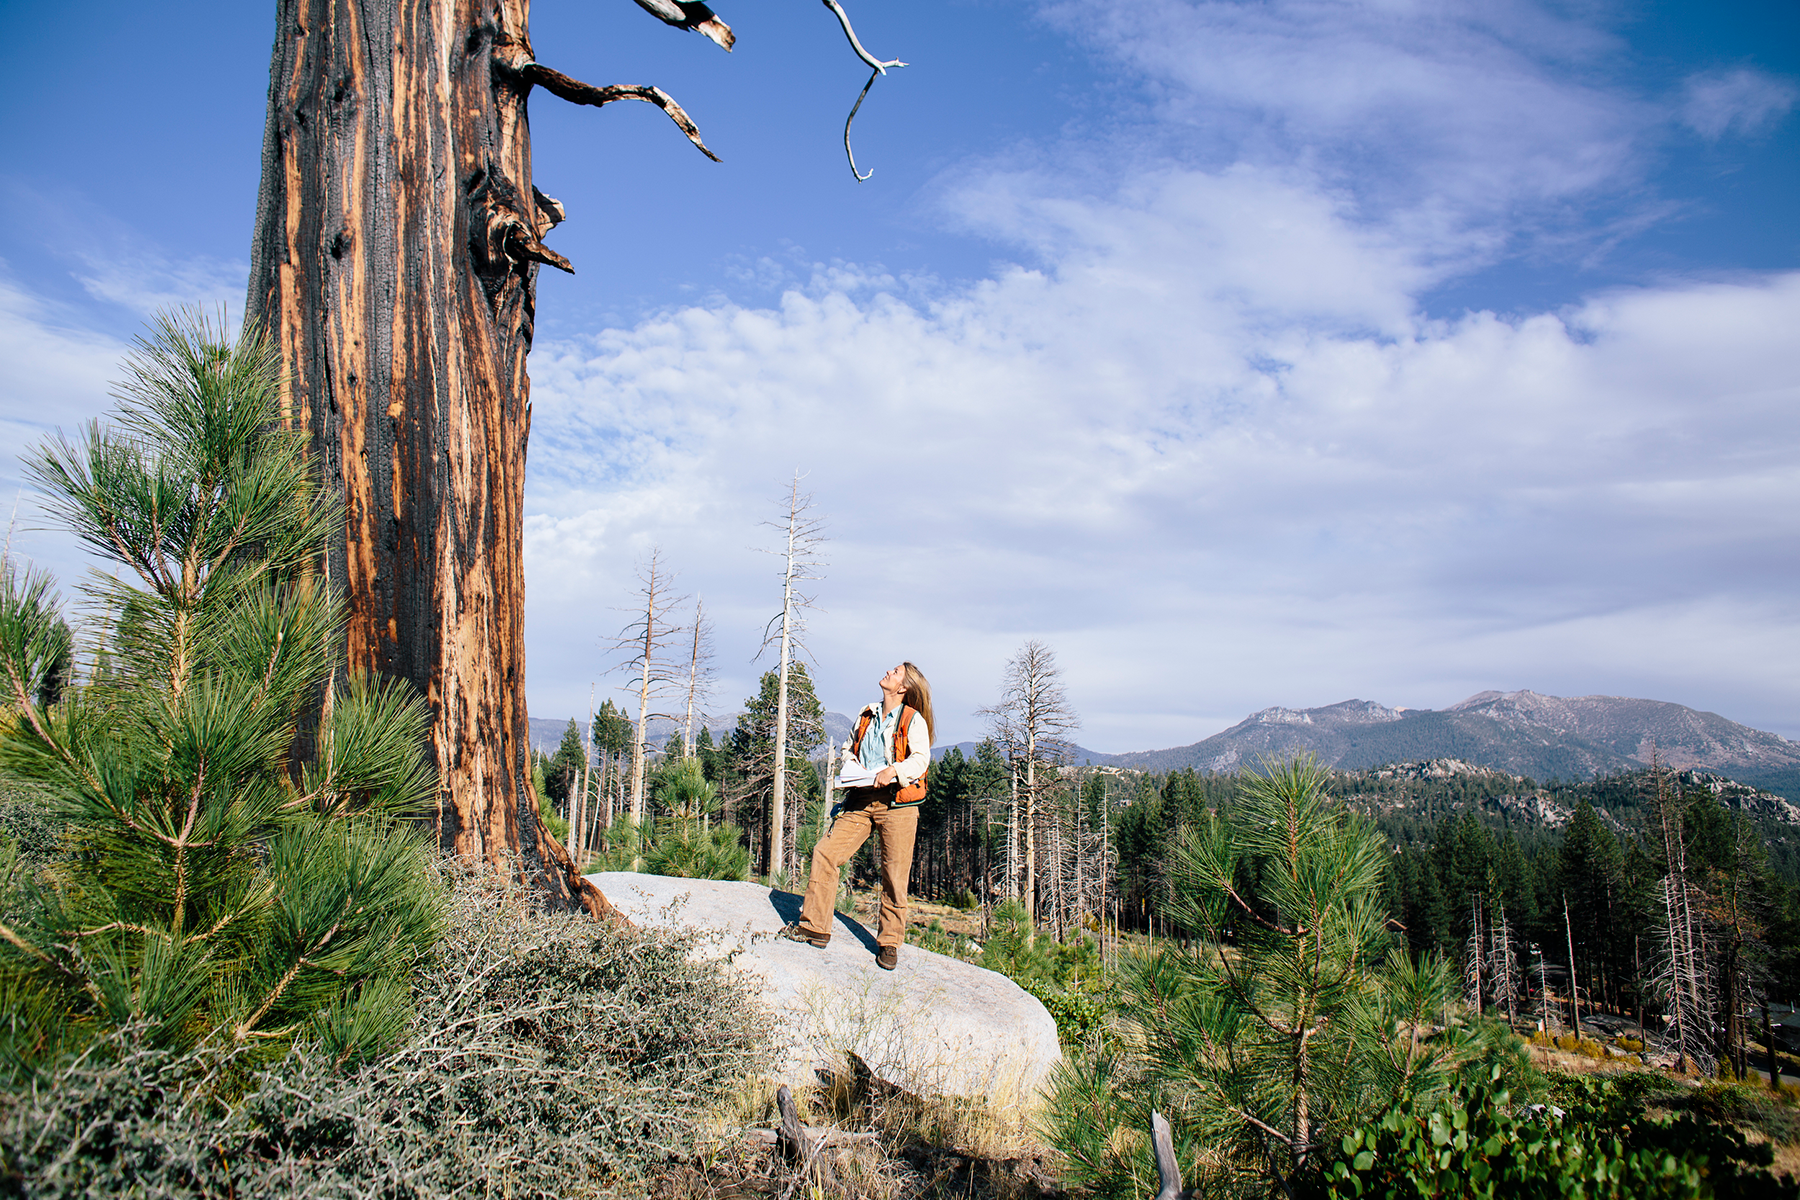 Woman scientist with long blonde hair holds a clip board and looks up at the massive trunk of a tree with fire scars. She's standing on a rock at the base of the tree, within a forested/mountainous landscape